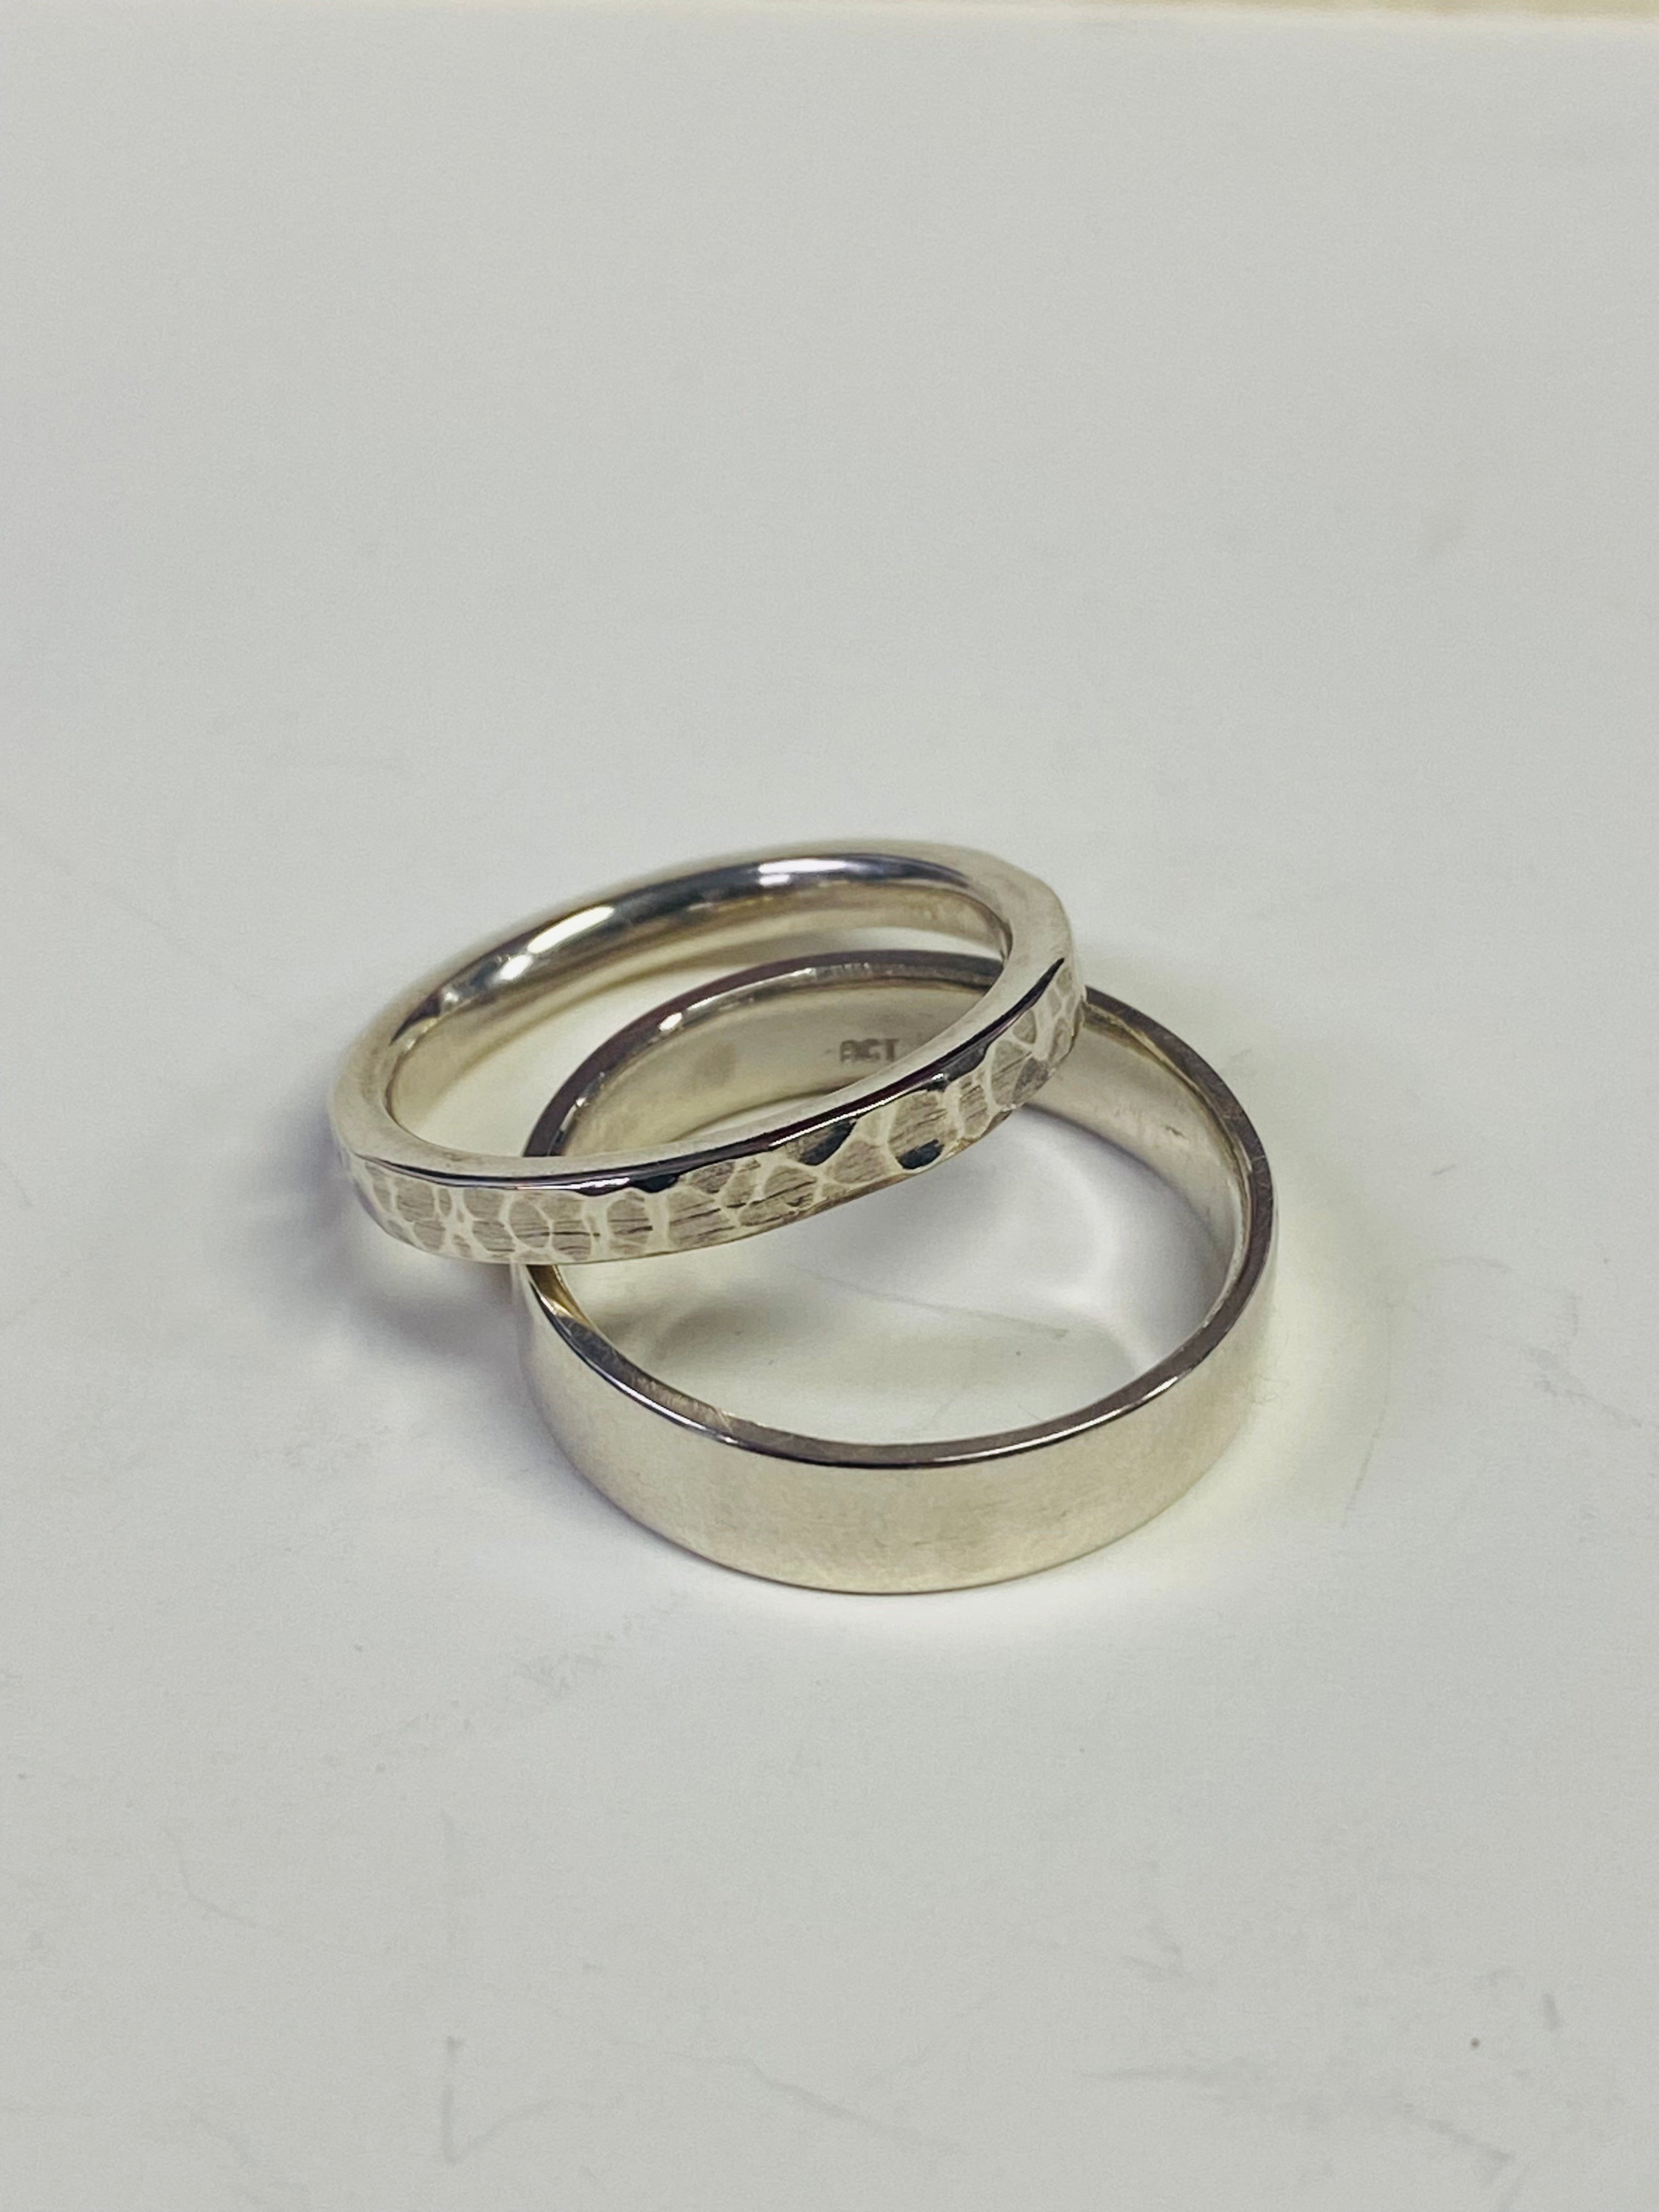 Wedding Ring Making Experience -TWO PEOPLE- 3 hr classes